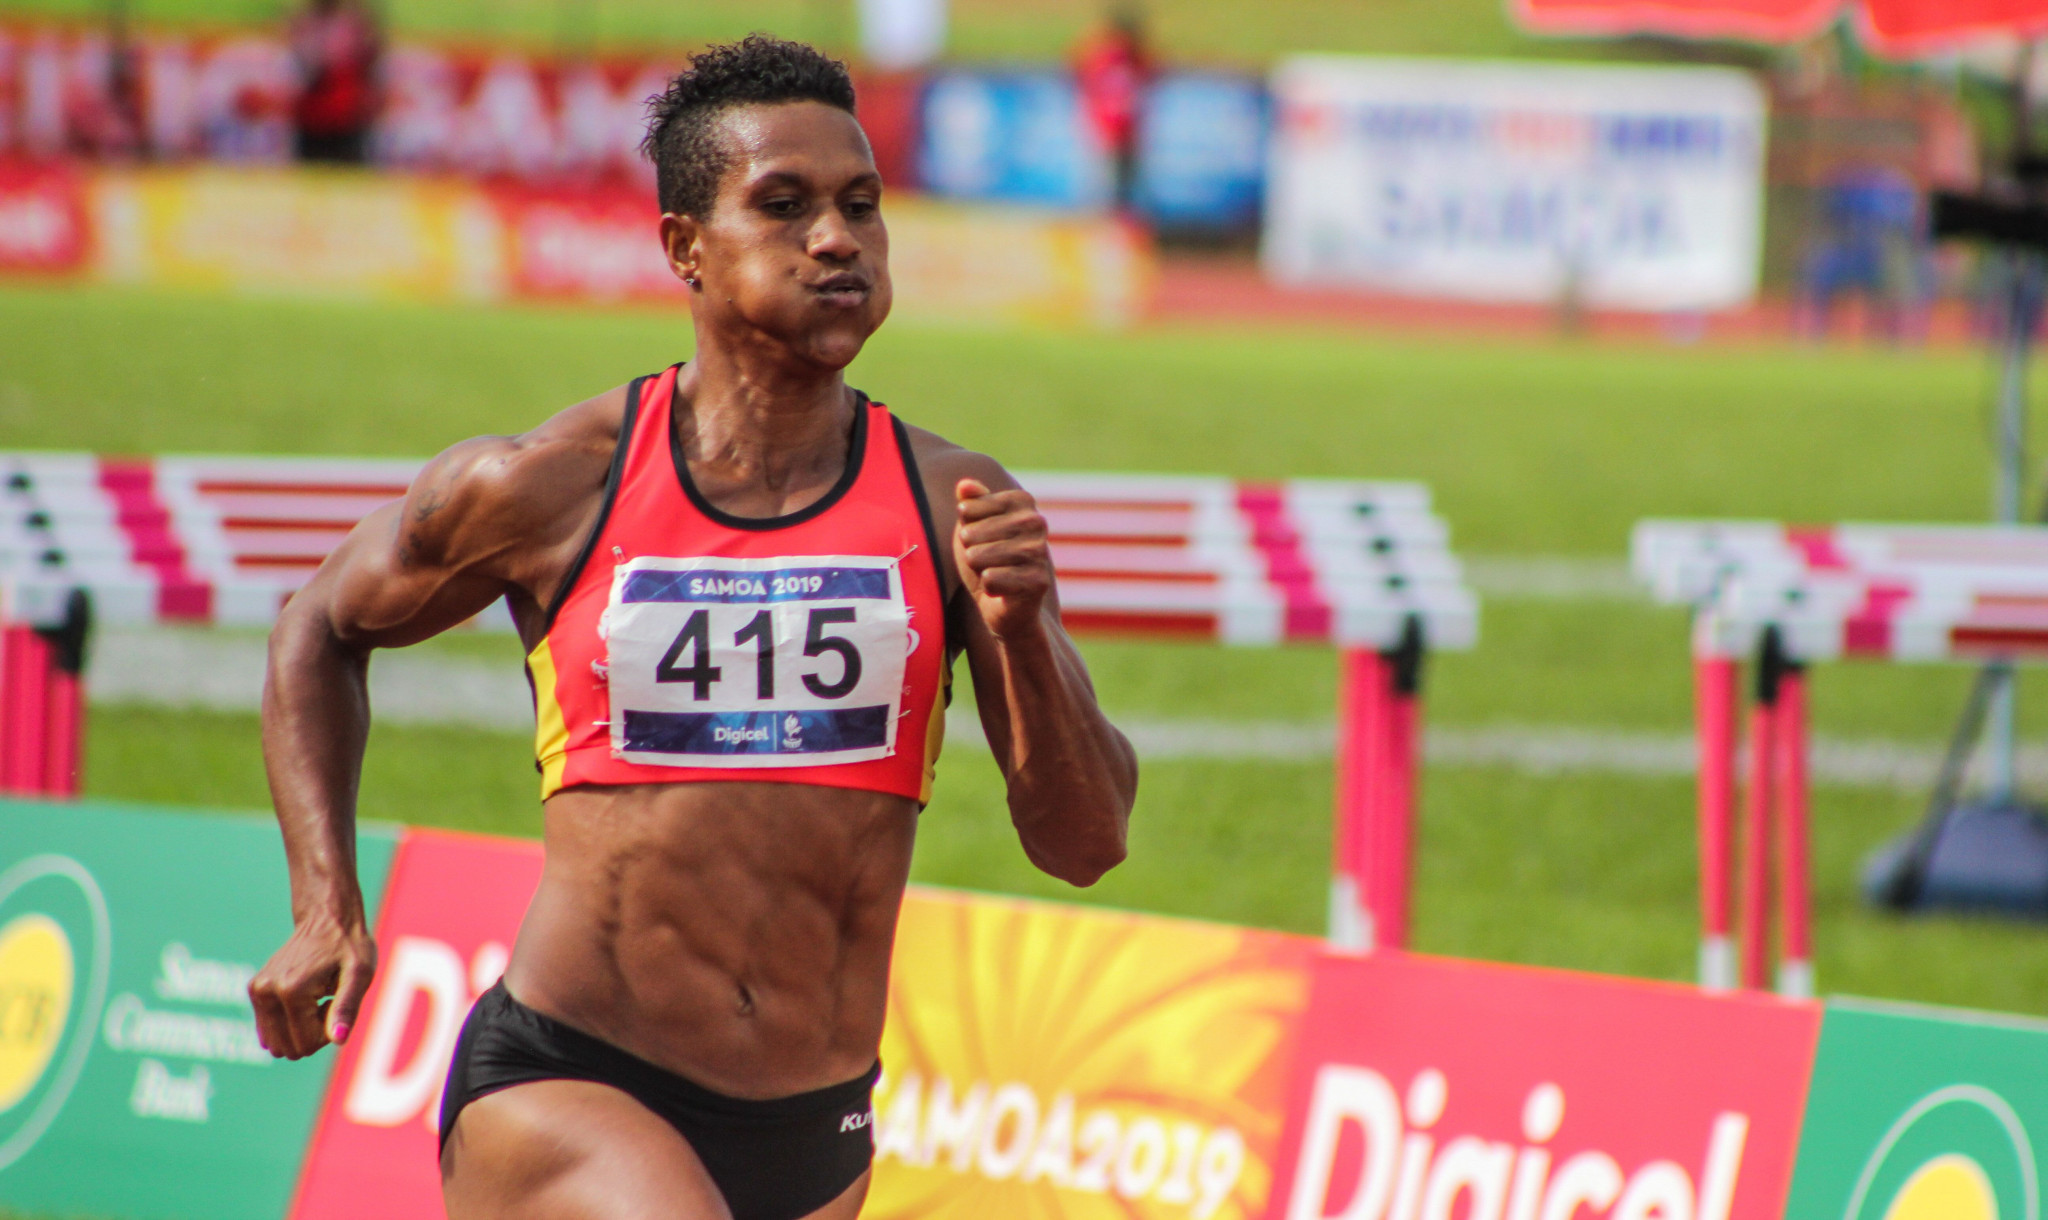 Papua New Guinea sprinter Toea Wisil won the 100m, 200m and 400m for the second consecutive Pacific Games at Samoa 2019 ©Samoa 2019